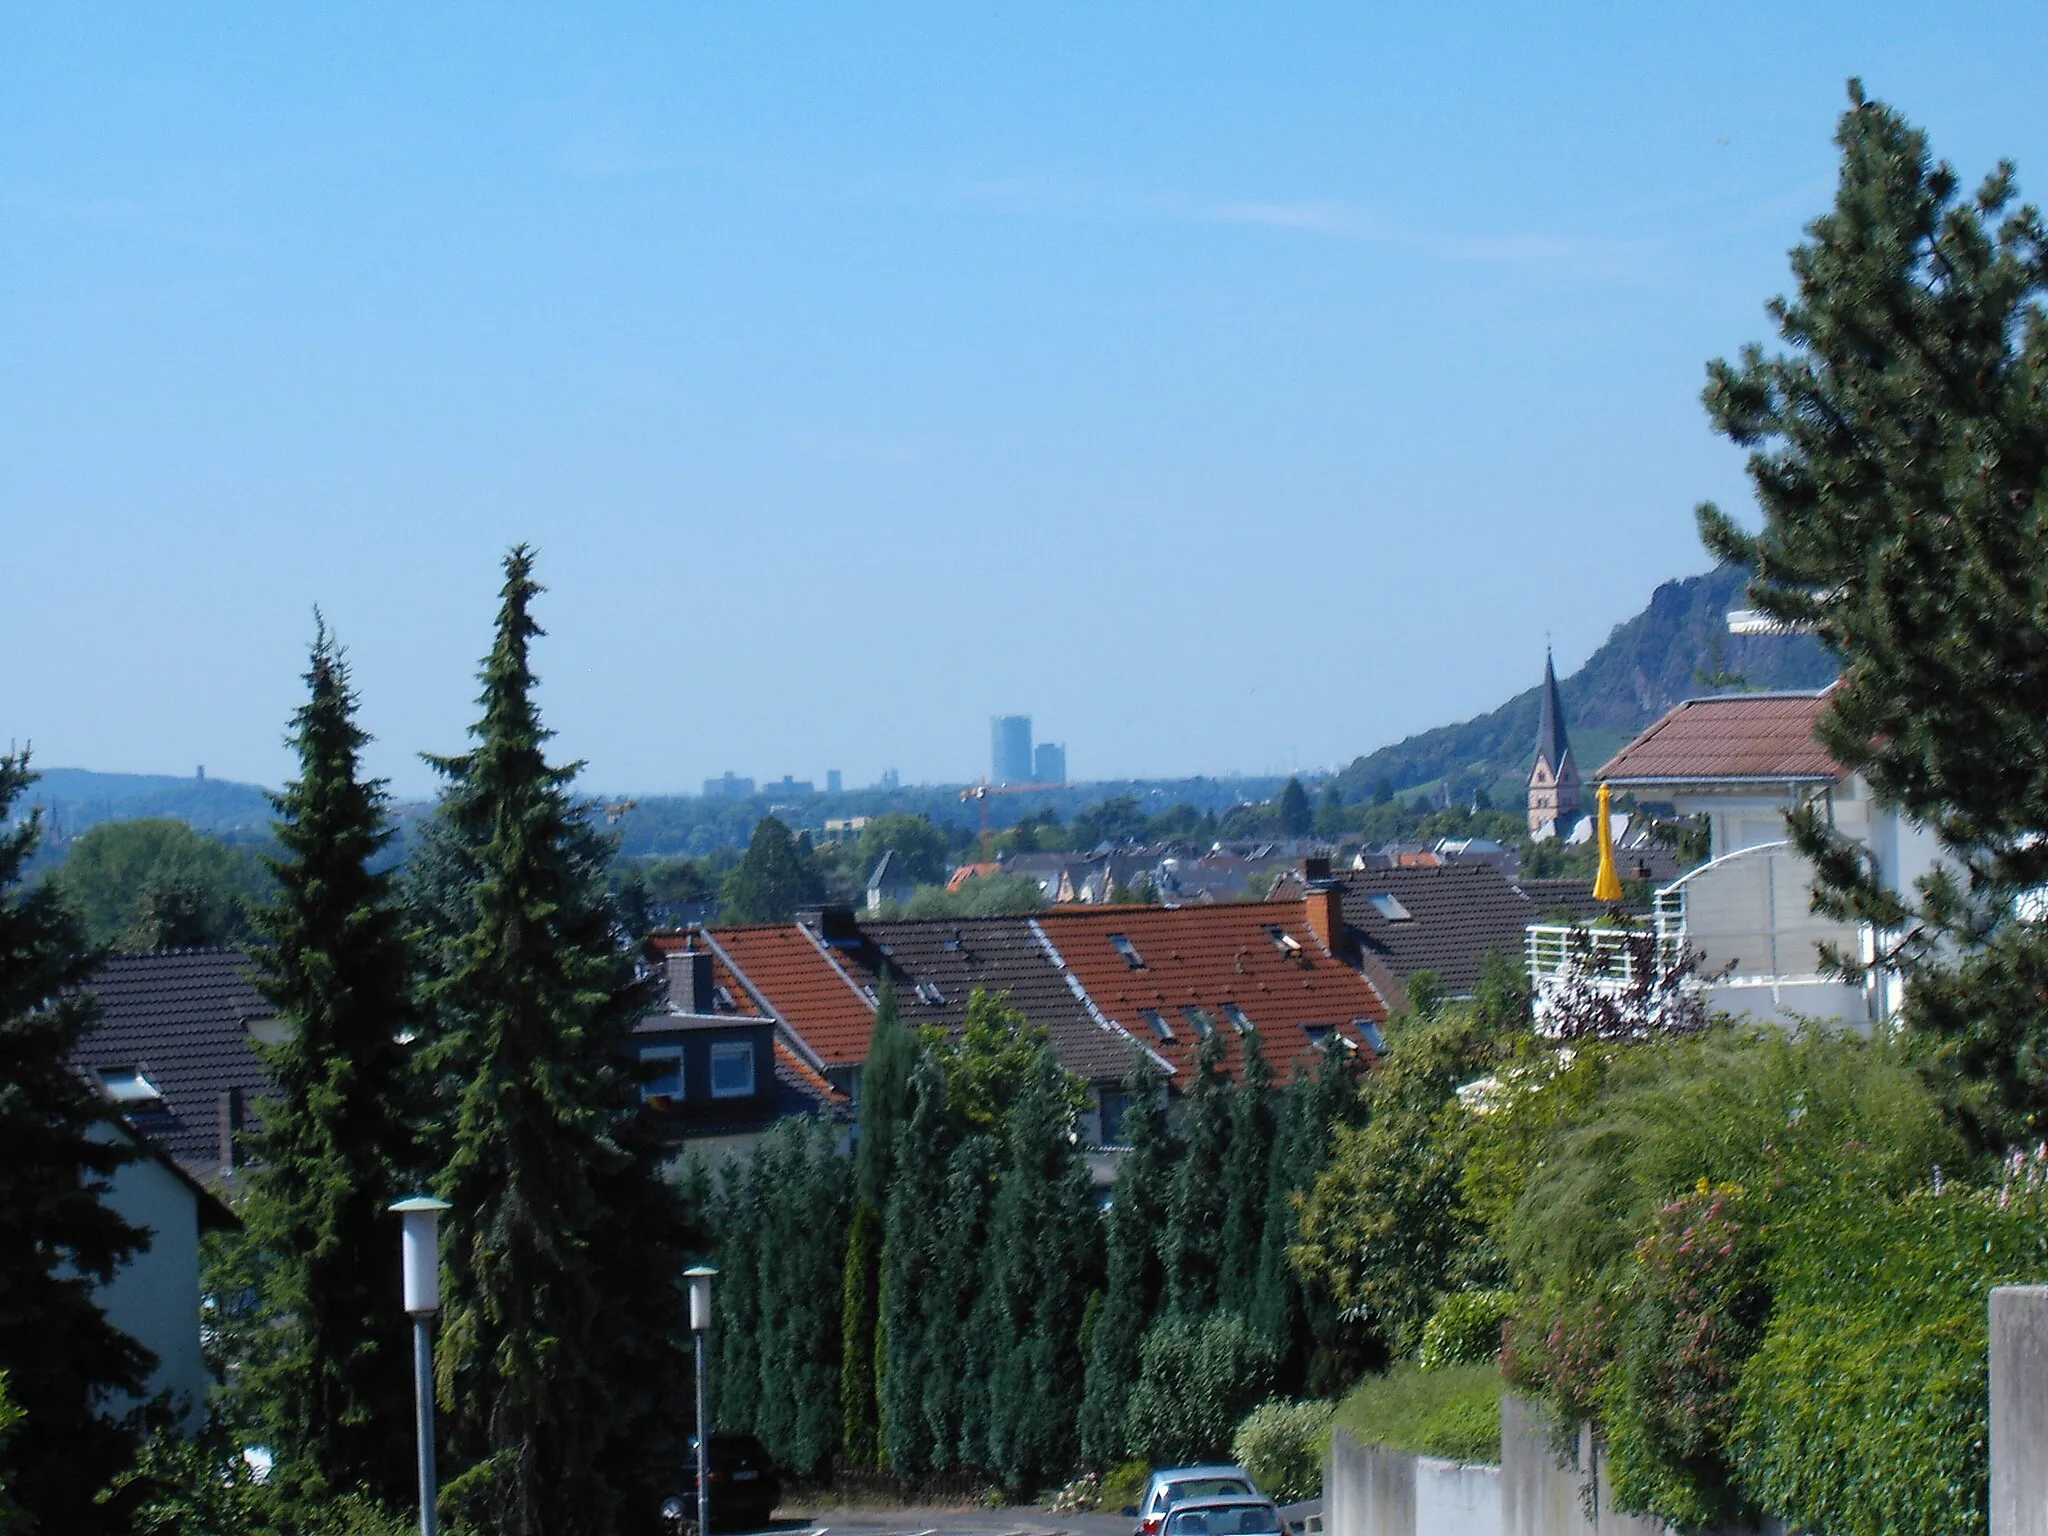 Photo showing: View from the Bad Honnefer city district Selhof of the inner town and Bonn. The following buildings in Bonn are perceivable: Godesburg, Kreuzbauten, Post Tower and Langer Eugen.